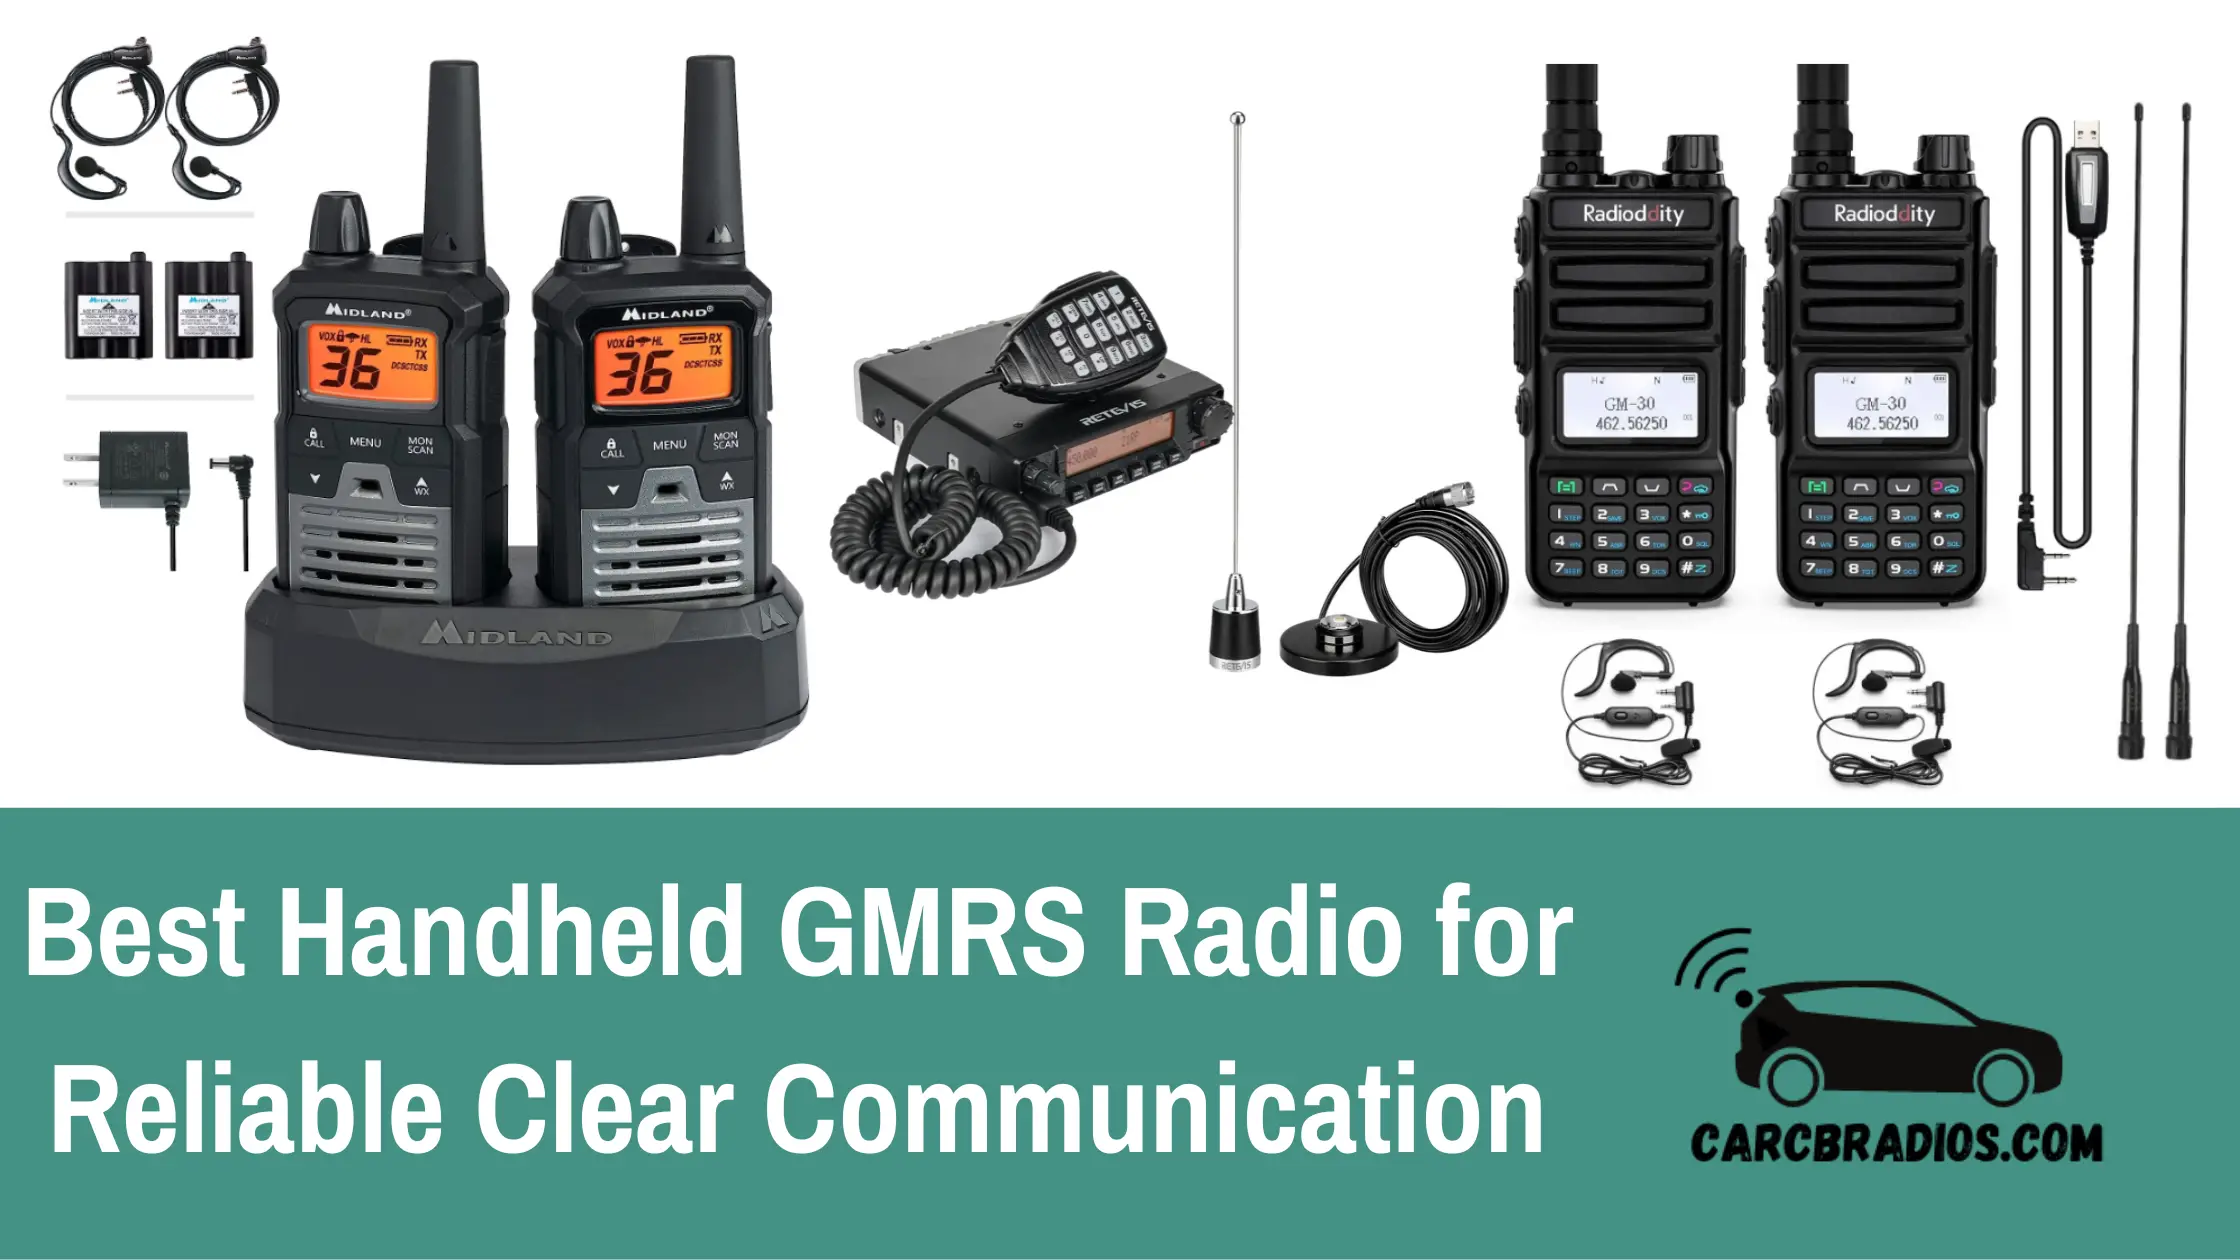 In this article, we will be discussing the best handheld GMRS radios on the market. When choosing a handheld GMRS radio, there are several factors to consider, such as range, battery life, durability, and ease of use. It's also important to note that a GMRS license is required to operate these radios legally.